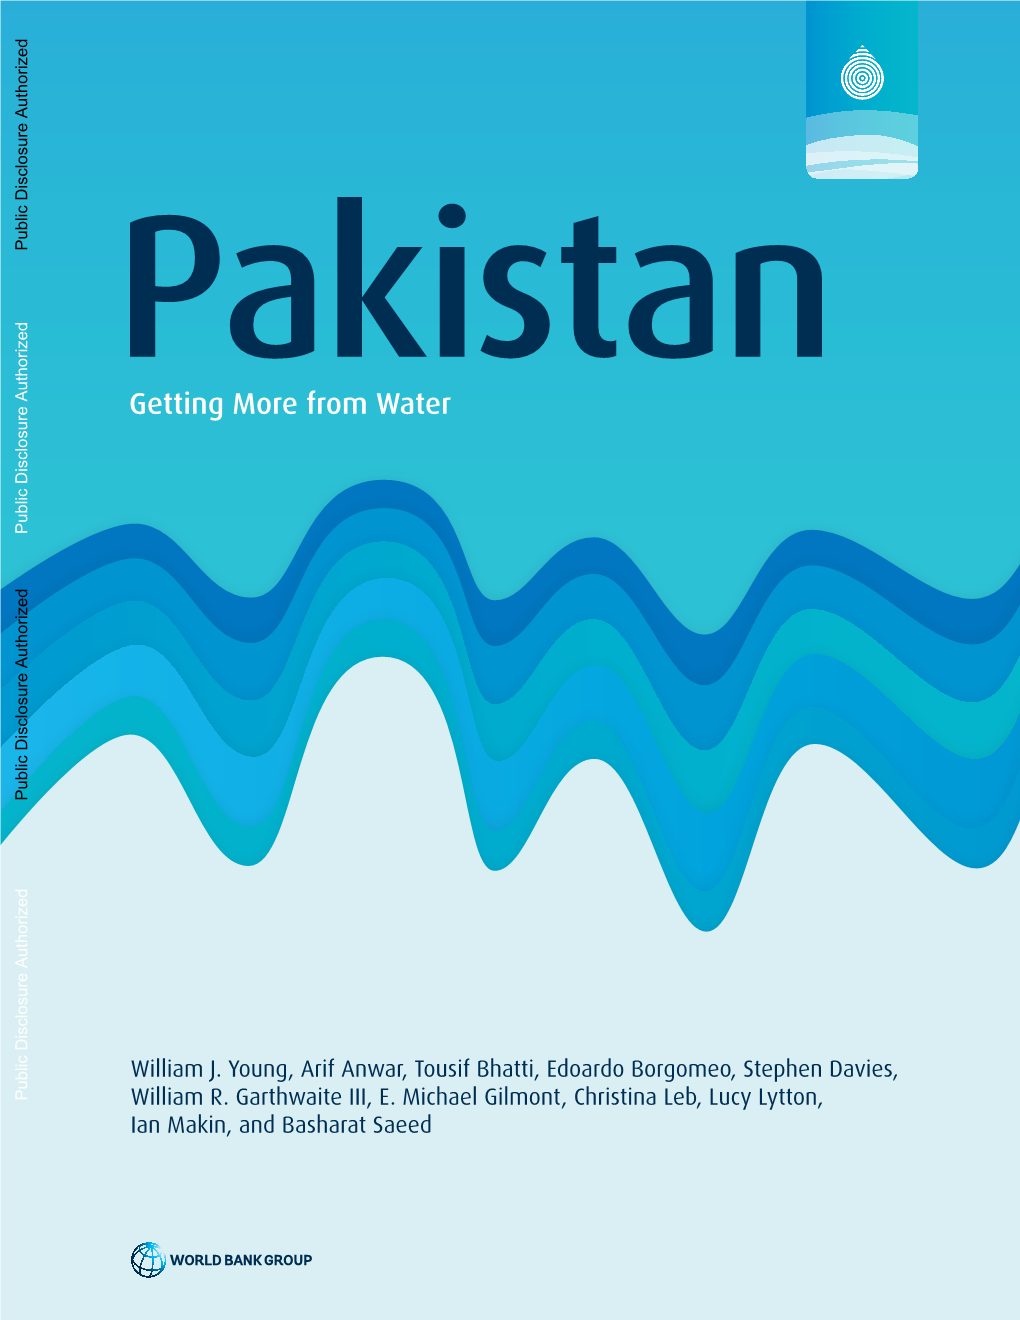 Pakistan: Getting More from Water.” Water Security Diagnostic